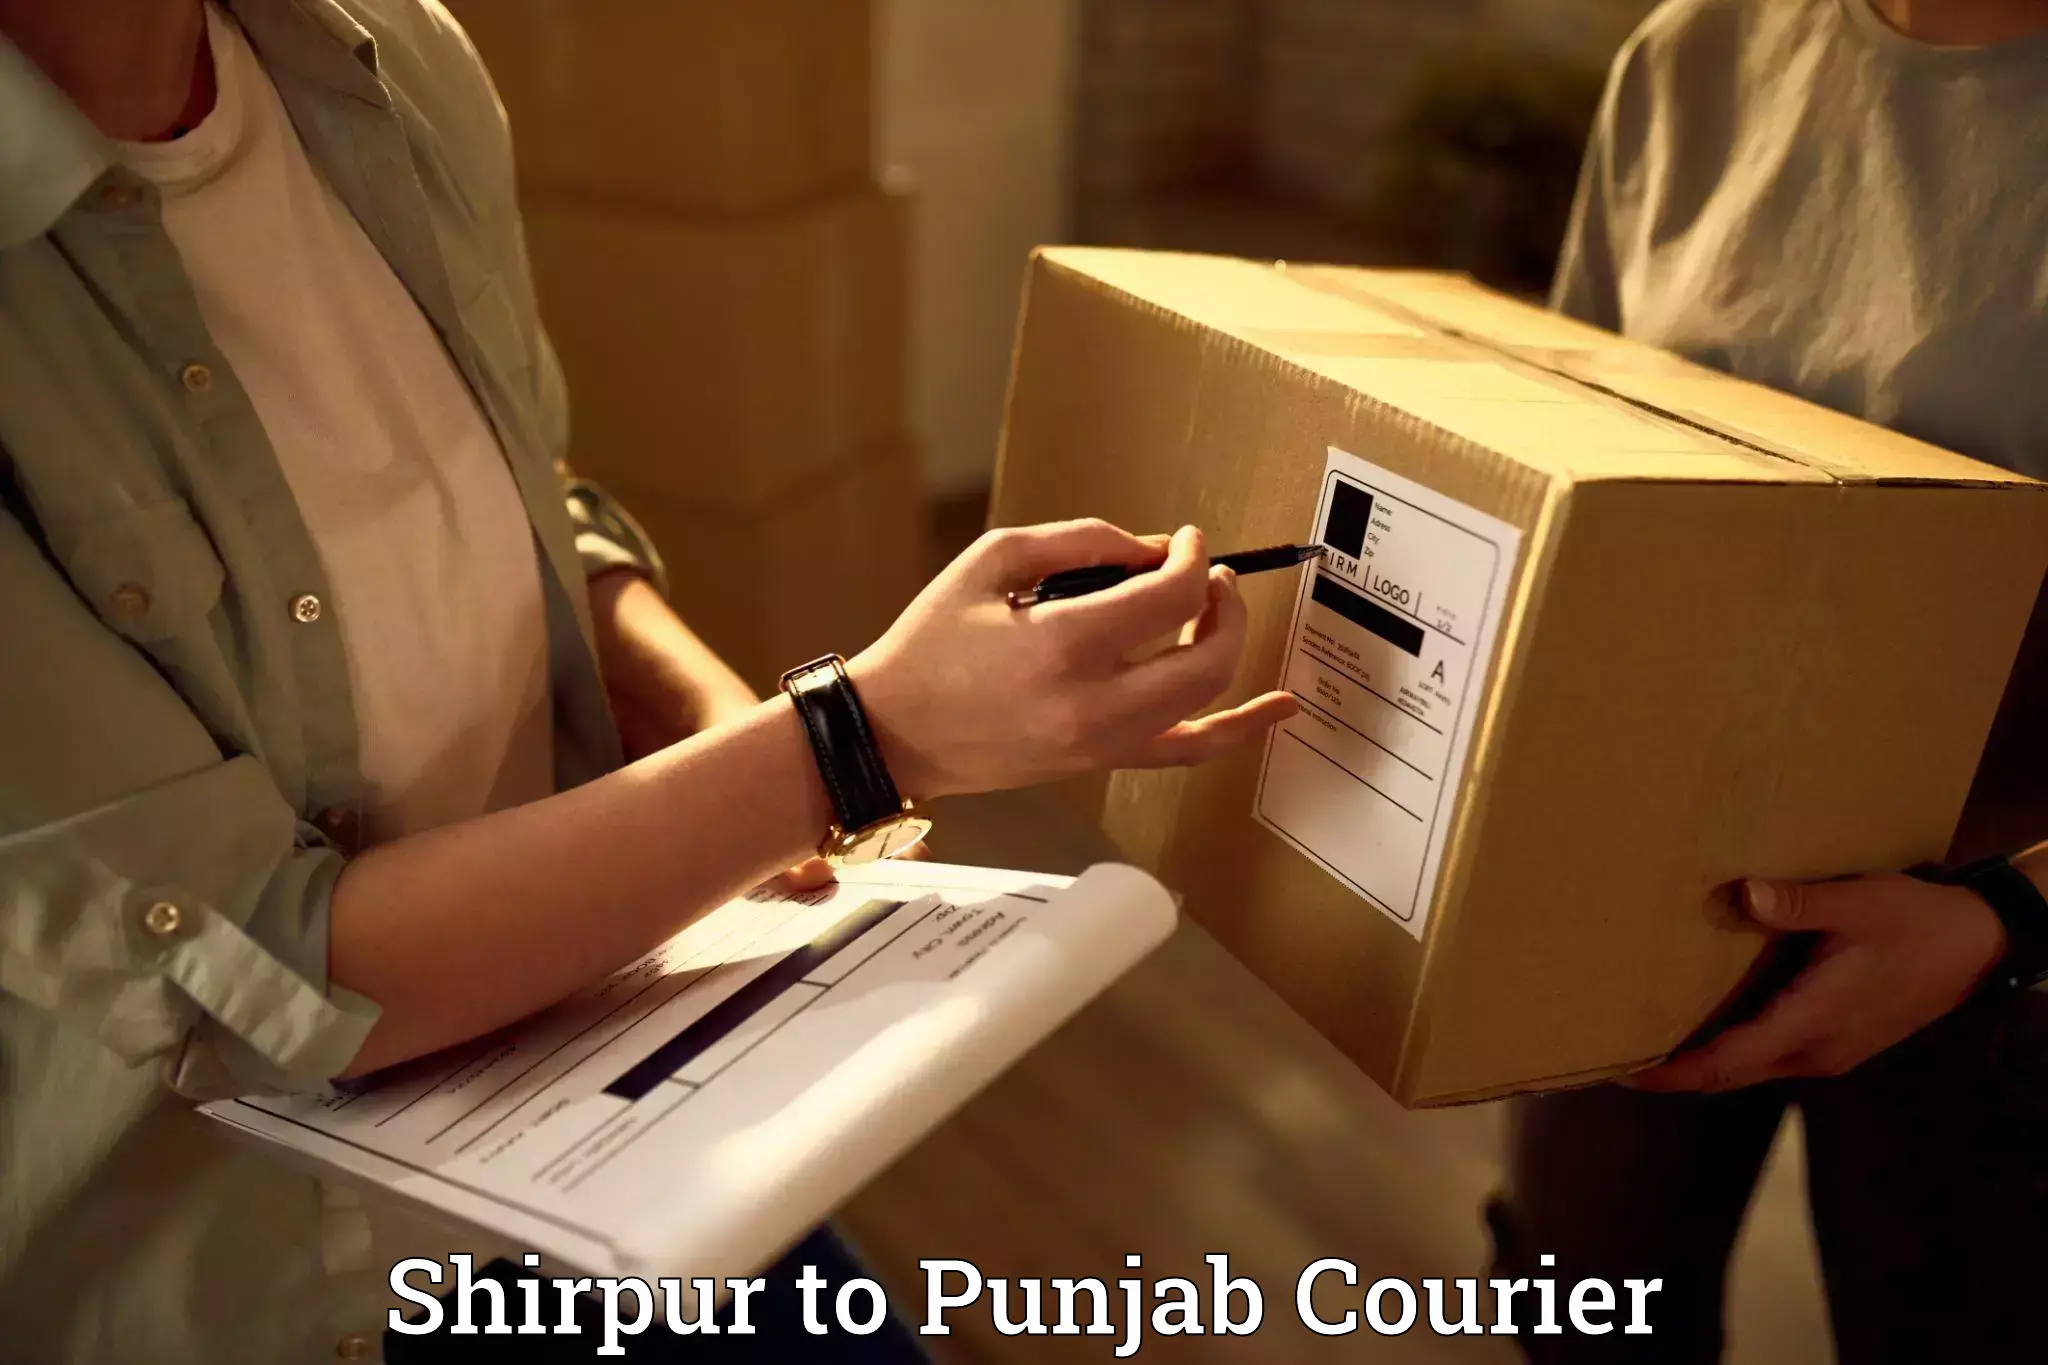 Home relocation experts Shirpur to Punjab